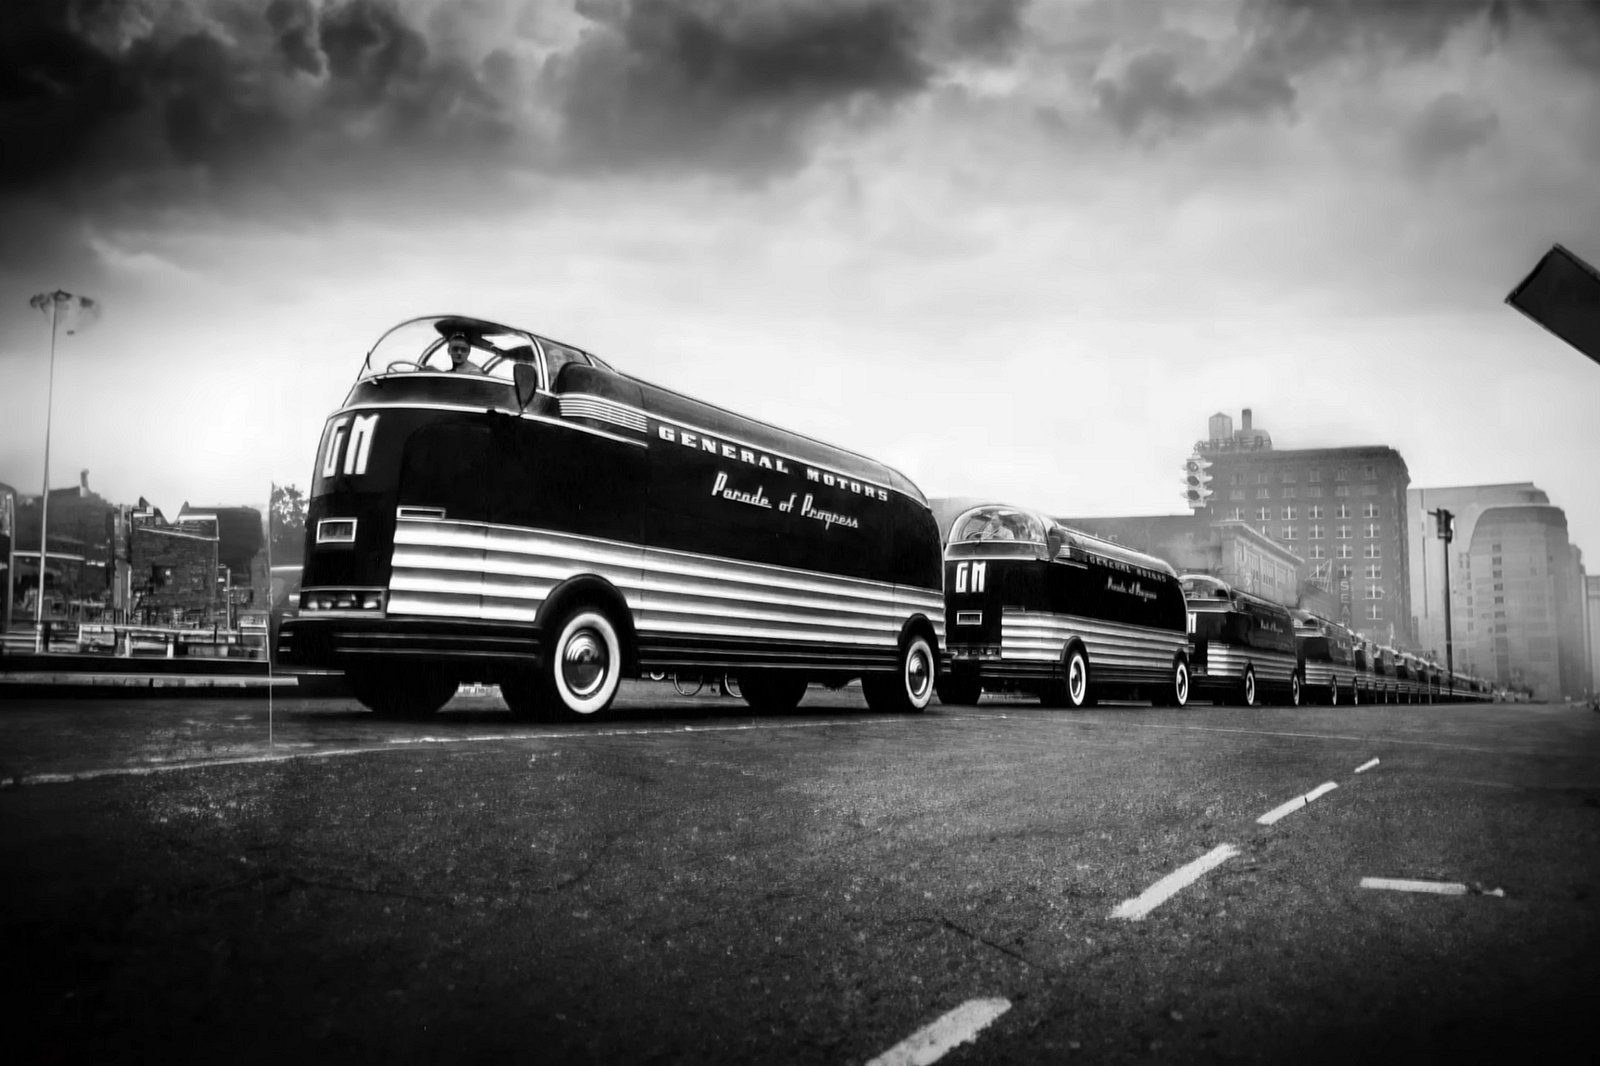 video, gm's futurliner buses are million-dollar pieces of automobile history never to be repeated